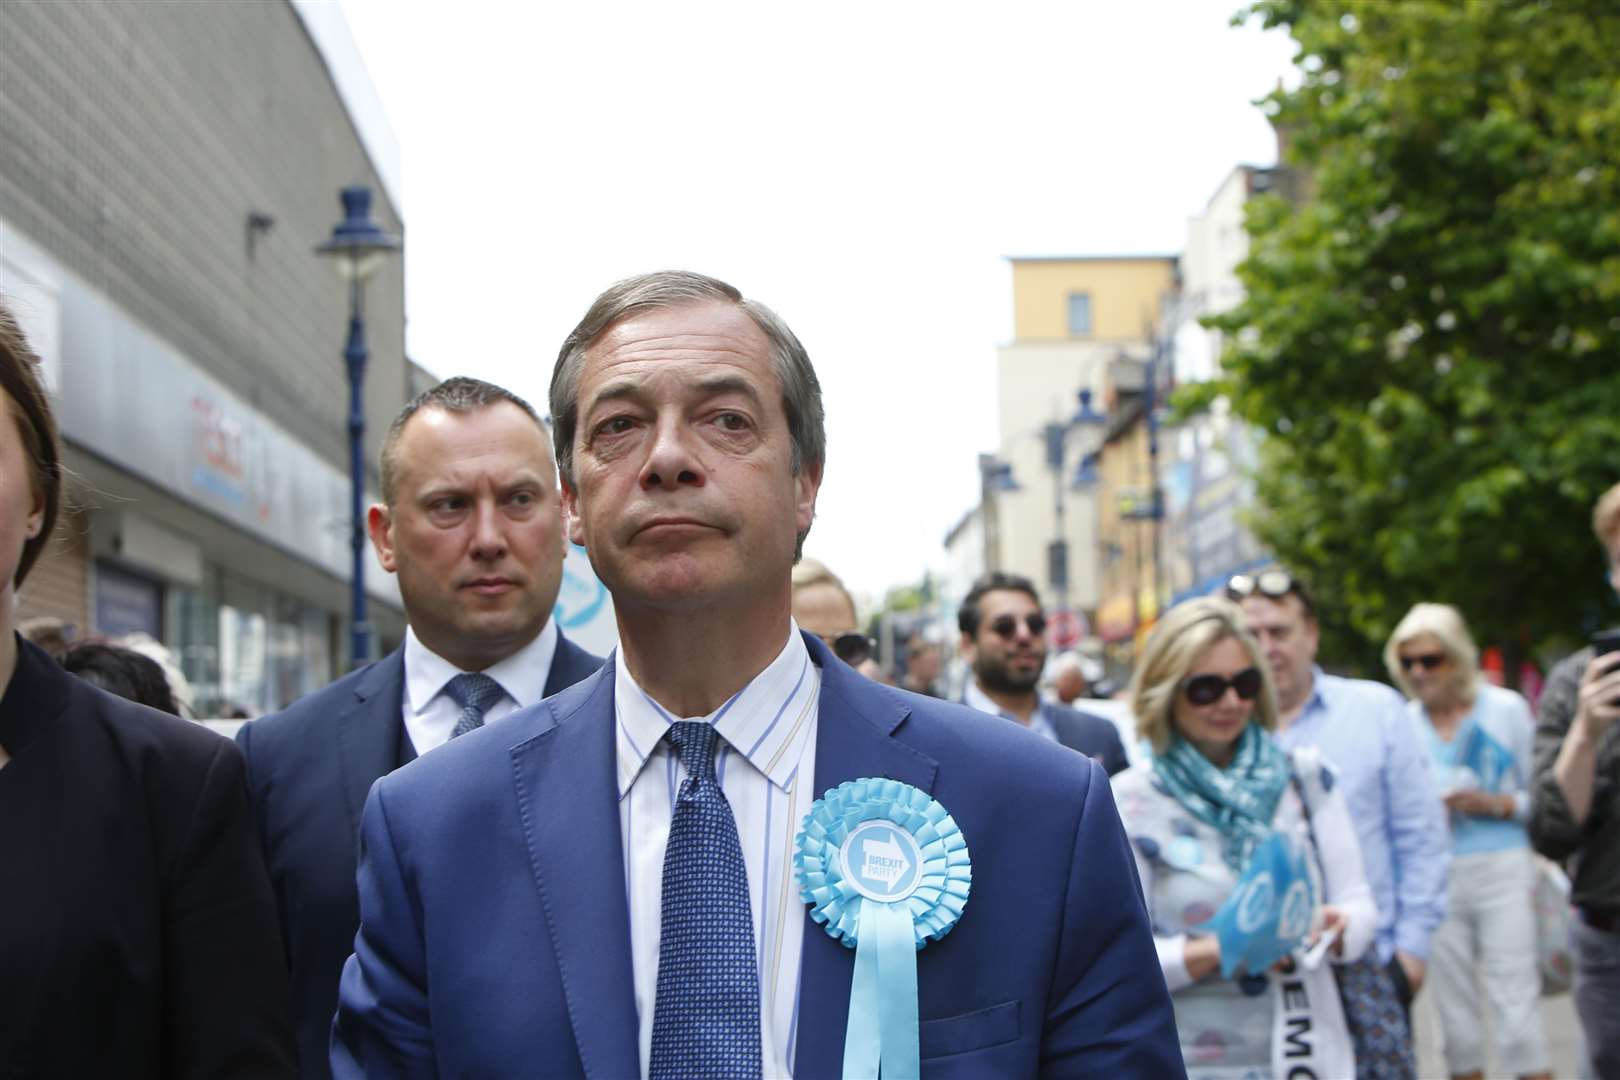 Now: Brexit Party leader Nigel Farage is not standing for MP this time around